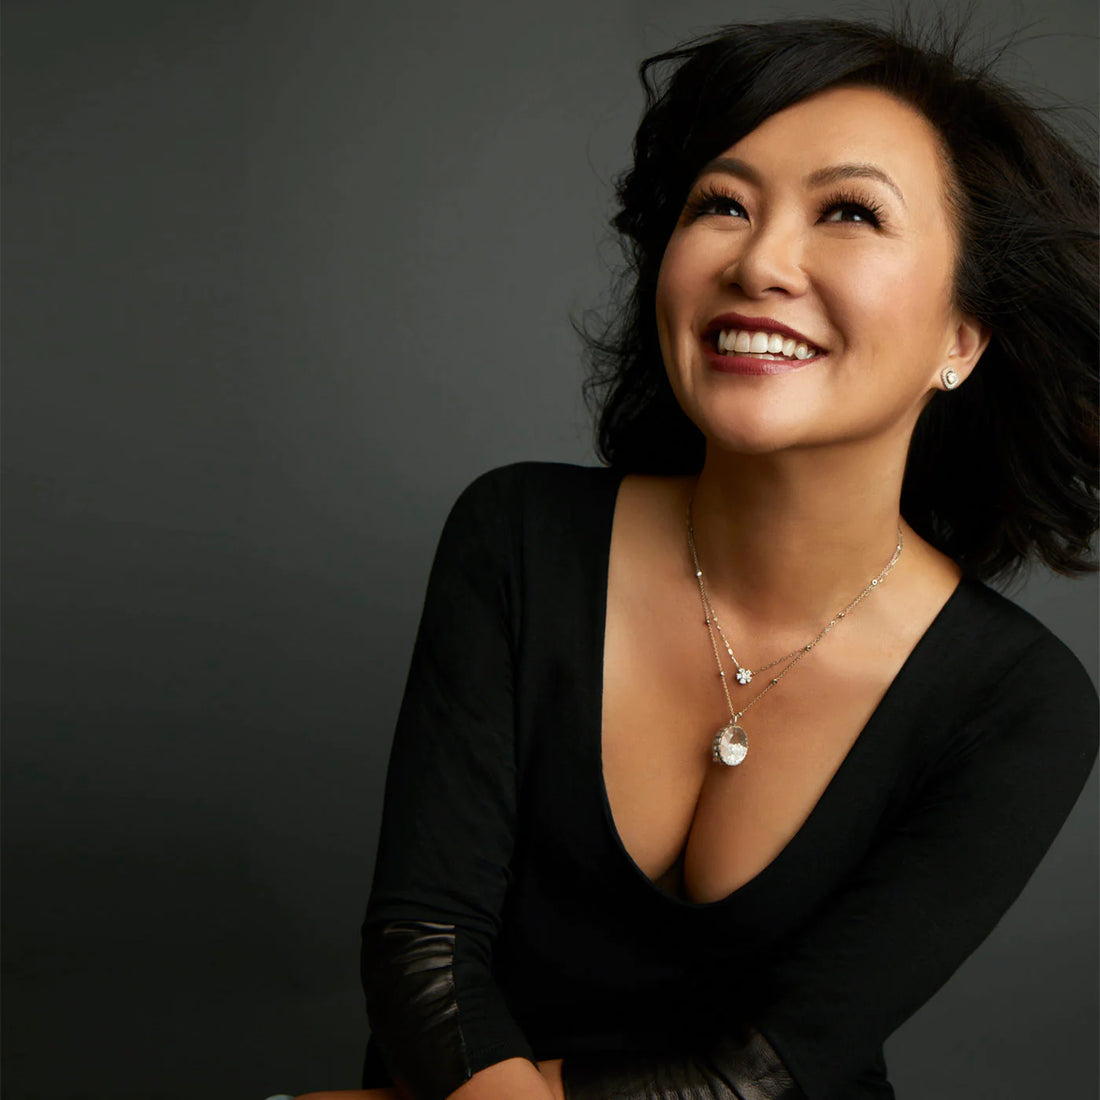 Interview: Emily Lau, Founder of The Little Bra Company